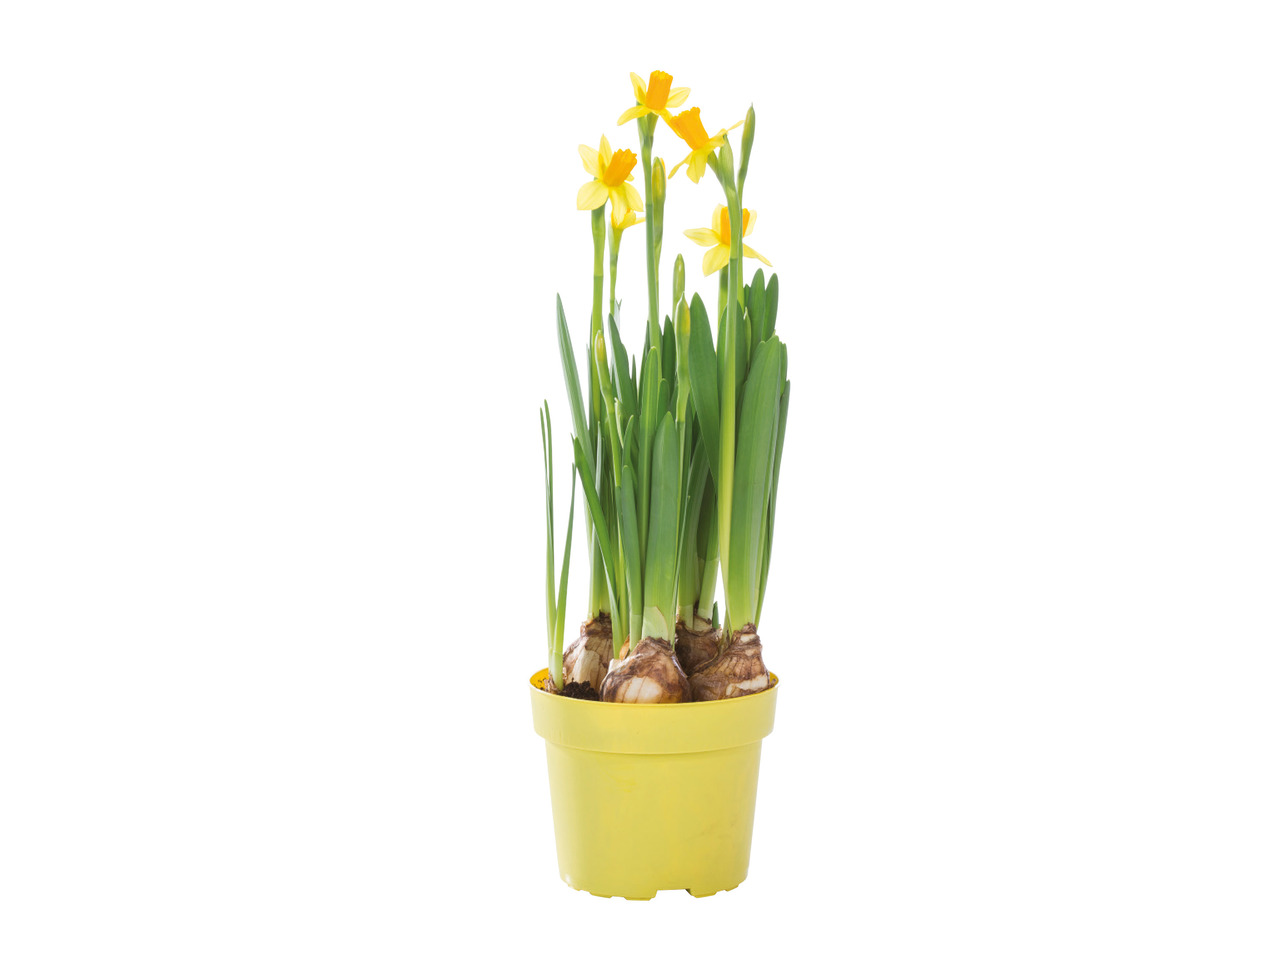 Potted Bulbs in Colourful Pot1